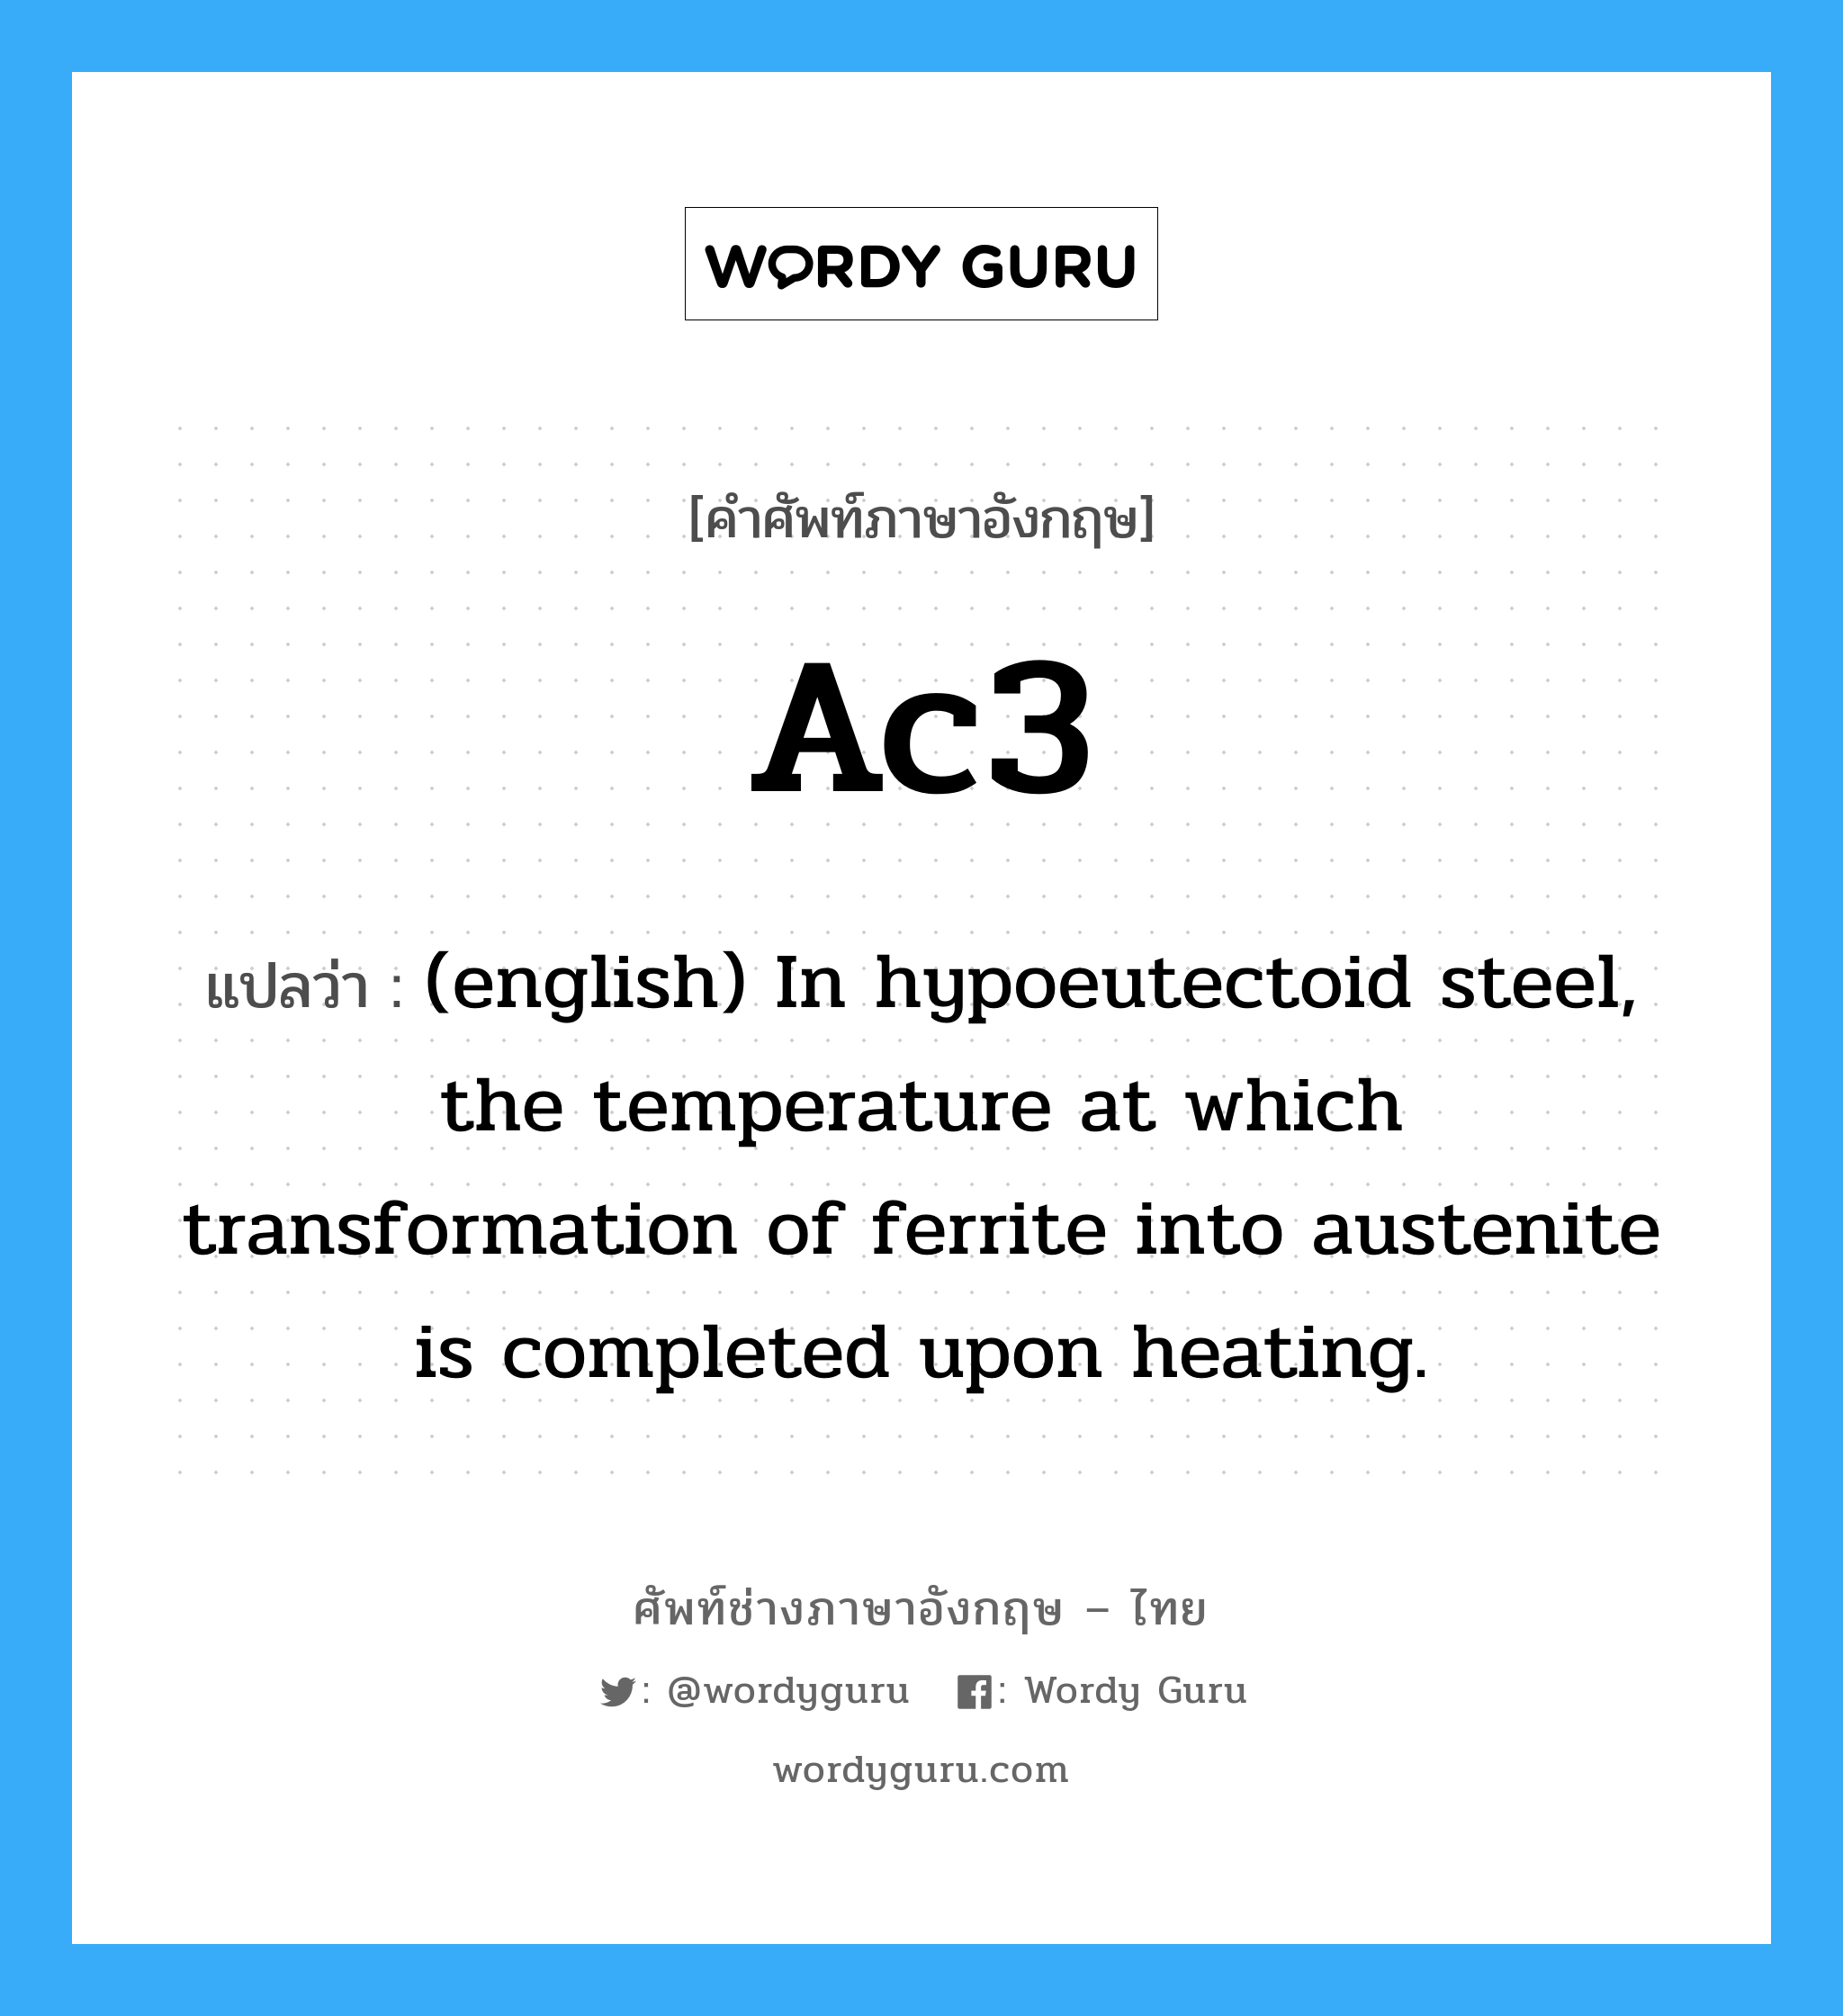 (english) In hypoeutectoid steel, the temperature at which transformation of ferrite into austenite is completed upon heating. ภาษาอังกฤษ?, คำศัพท์ช่างภาษาอังกฤษ - ไทย (english) In hypoeutectoid steel, the temperature at which transformation of ferrite into austenite is completed upon heating. คำศัพท์ภาษาอังกฤษ (english) In hypoeutectoid steel, the temperature at which transformation of ferrite into austenite is completed upon heating. แปลว่า Ac3